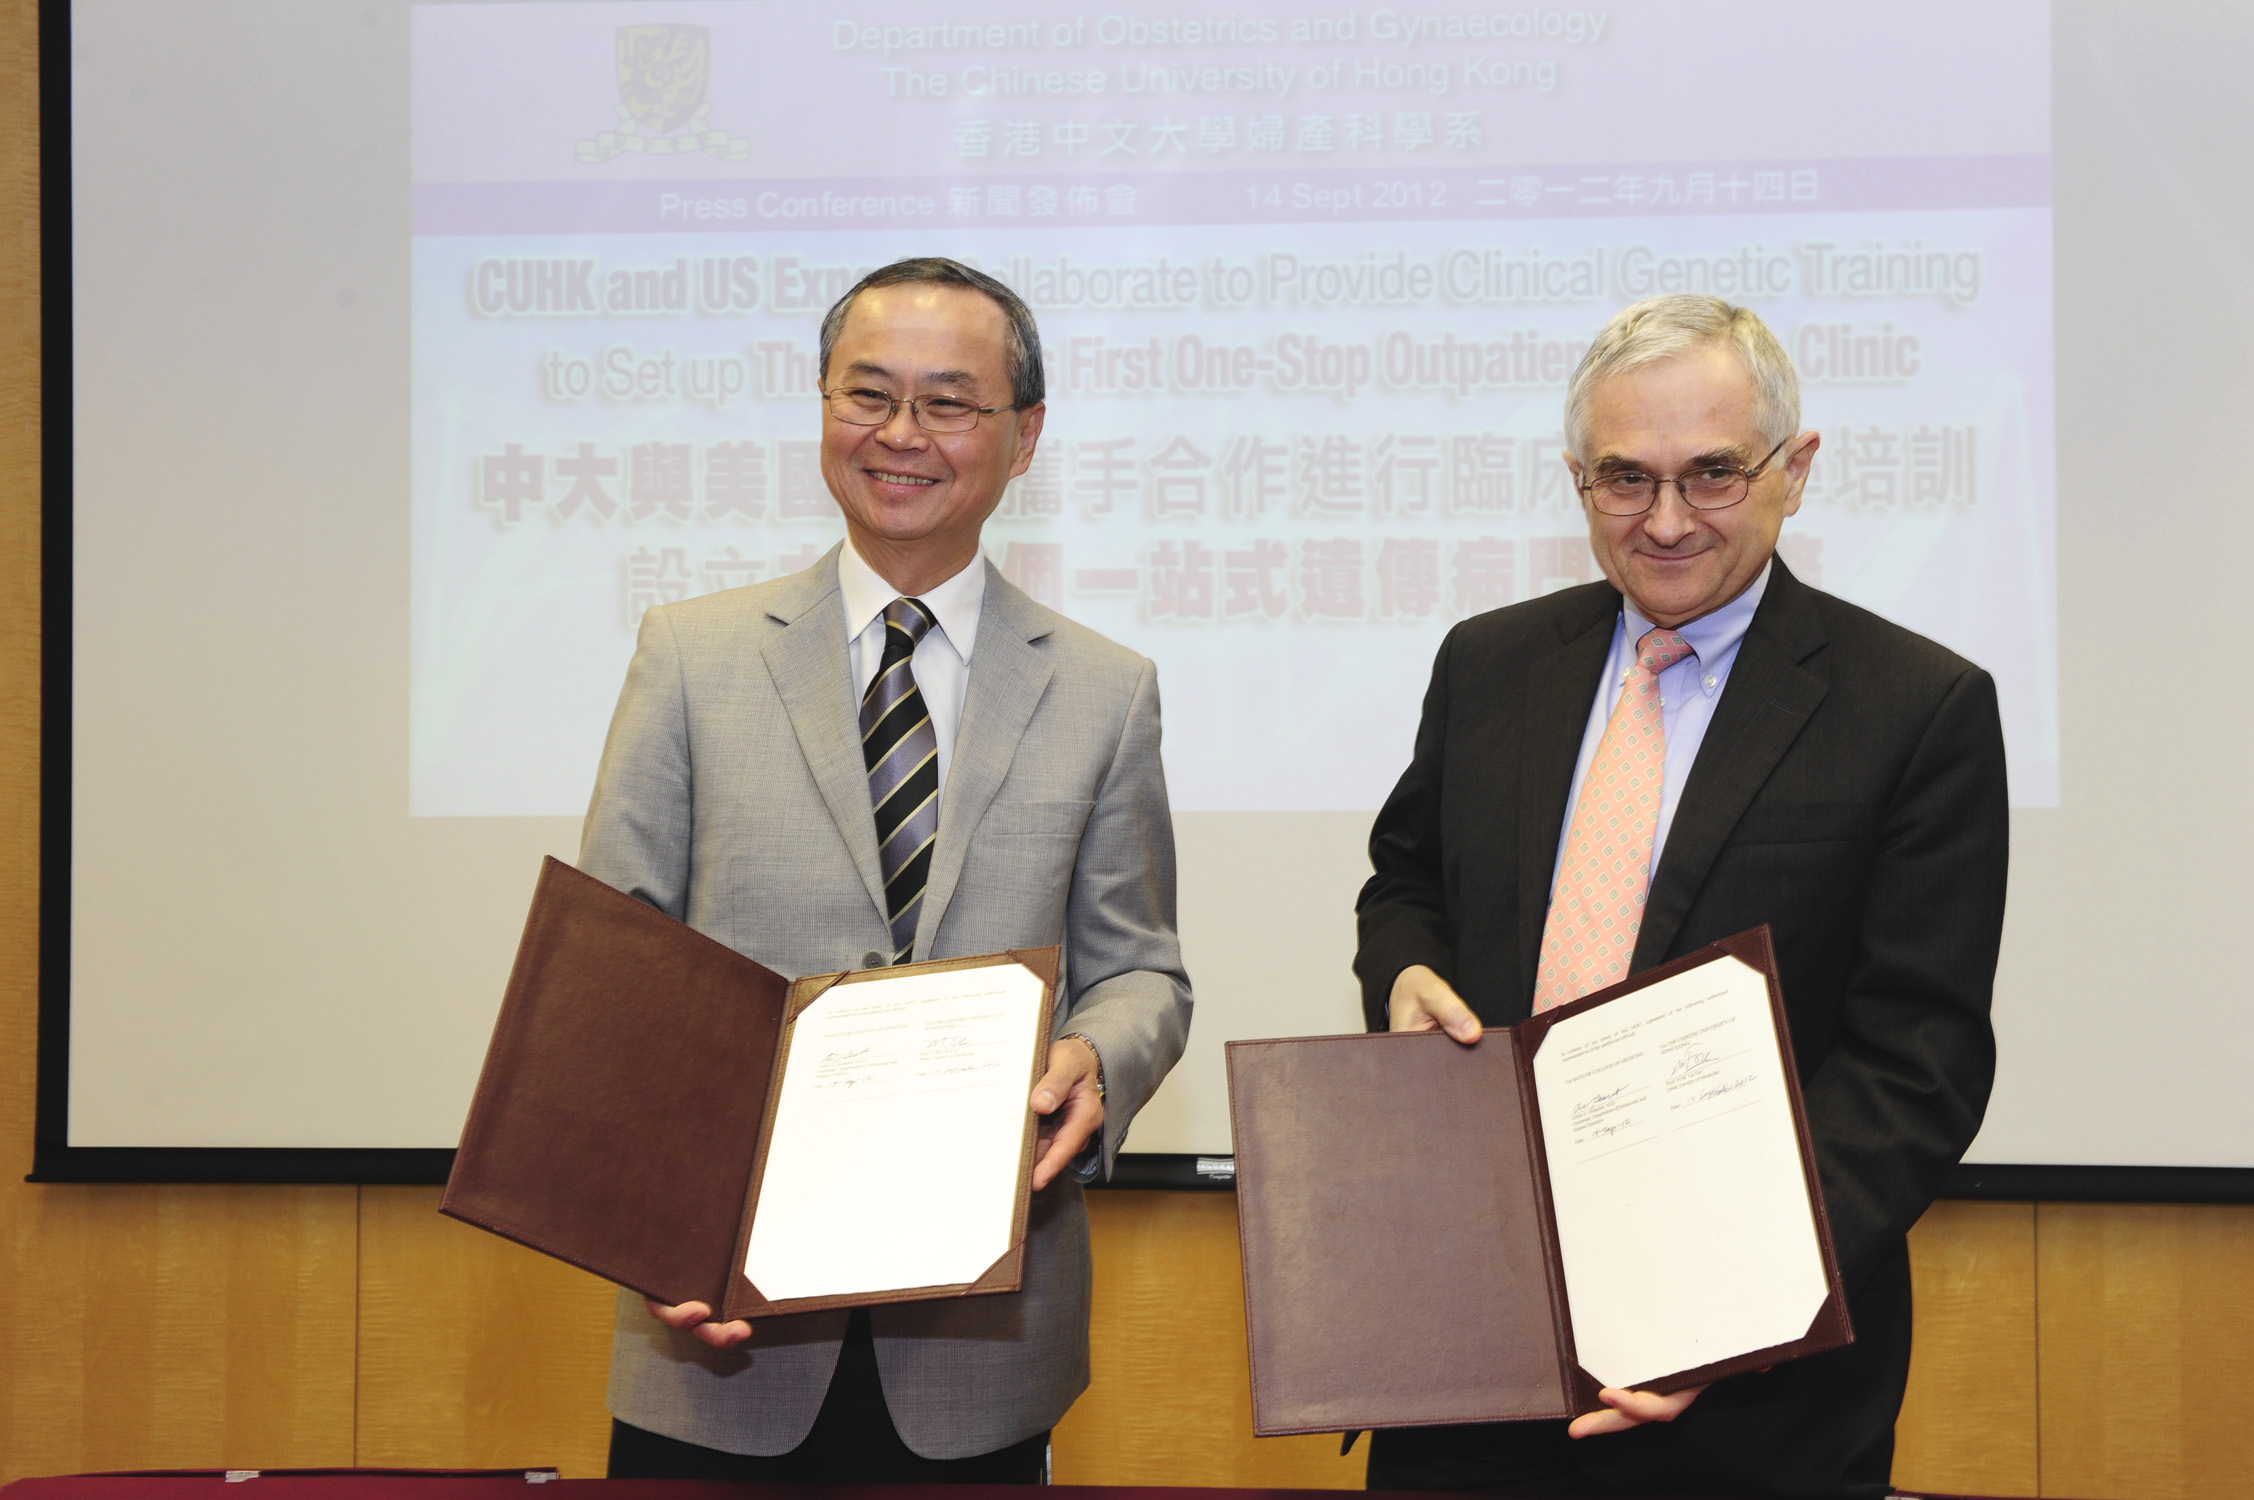 From left: Prof. Tai Fai FOK, Dean of Faculty of Medicine and Professor of Paediatrics and Prof. Arthur BEAUDET, Professor, Department of Molecular and Human Genetics, Baylor College of medicine of The United States of America signed and present the memorandum of understanding